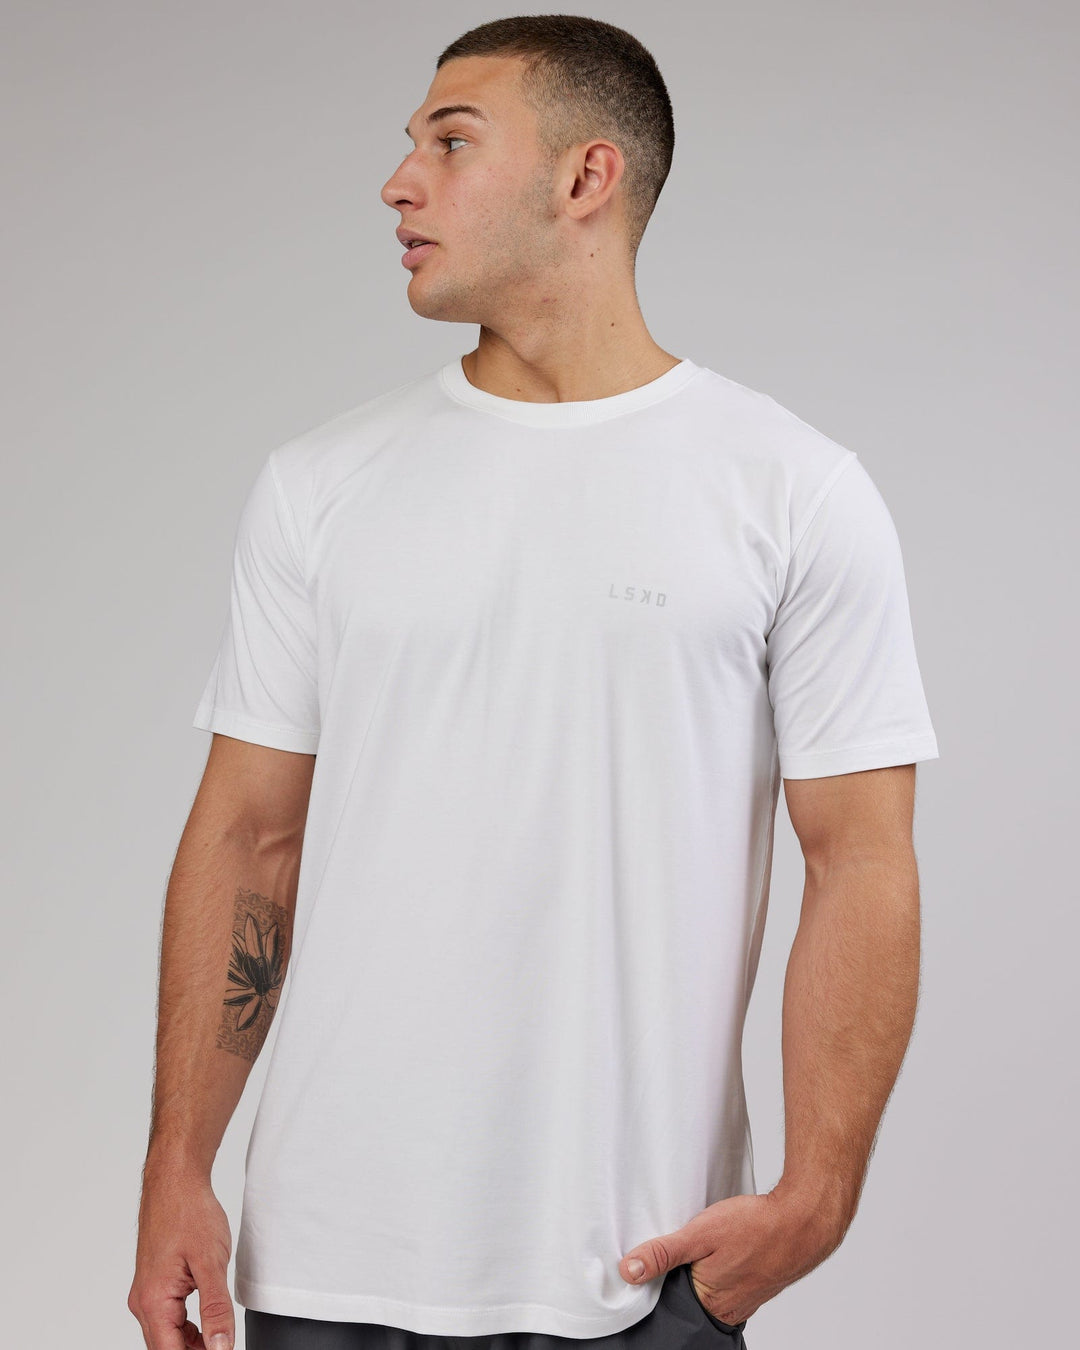 Delta Opp Sleeve Premium Shirt – The King McNeal Collection